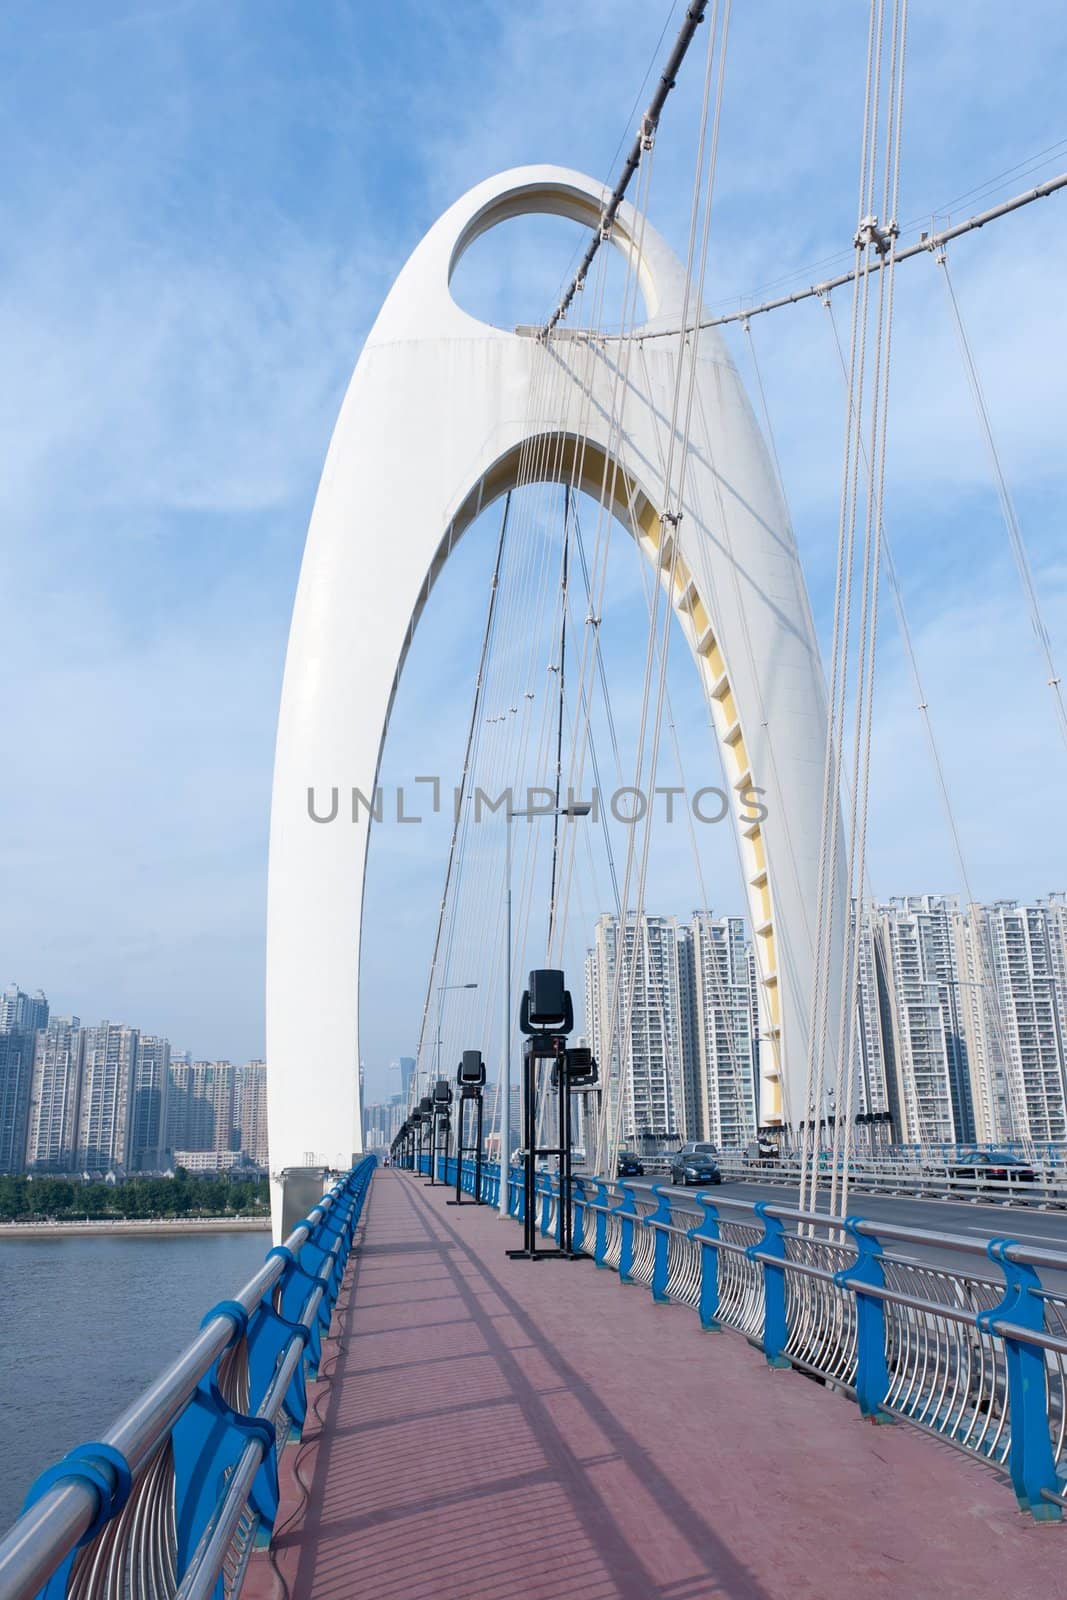 Scene of Liede bridge over the Pearl River in Guangzhou city, Guangdong province of China